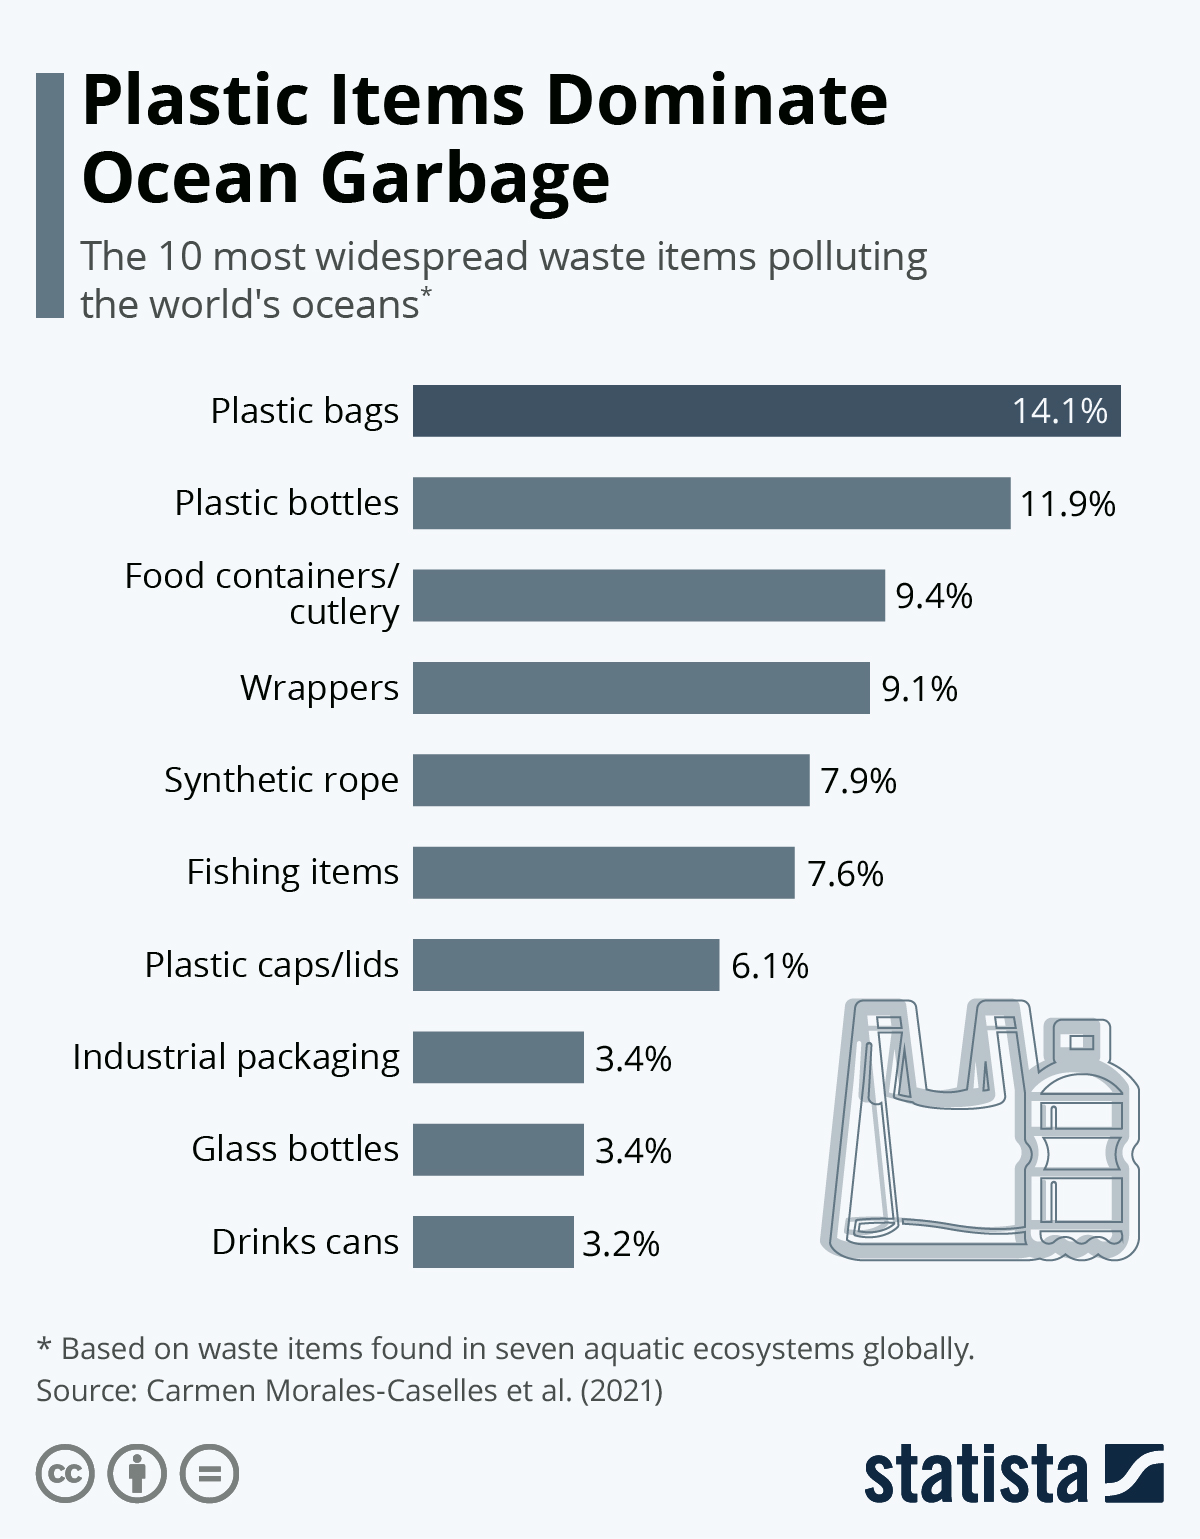 Numerous single-use plastic items are widespread in our oceans.